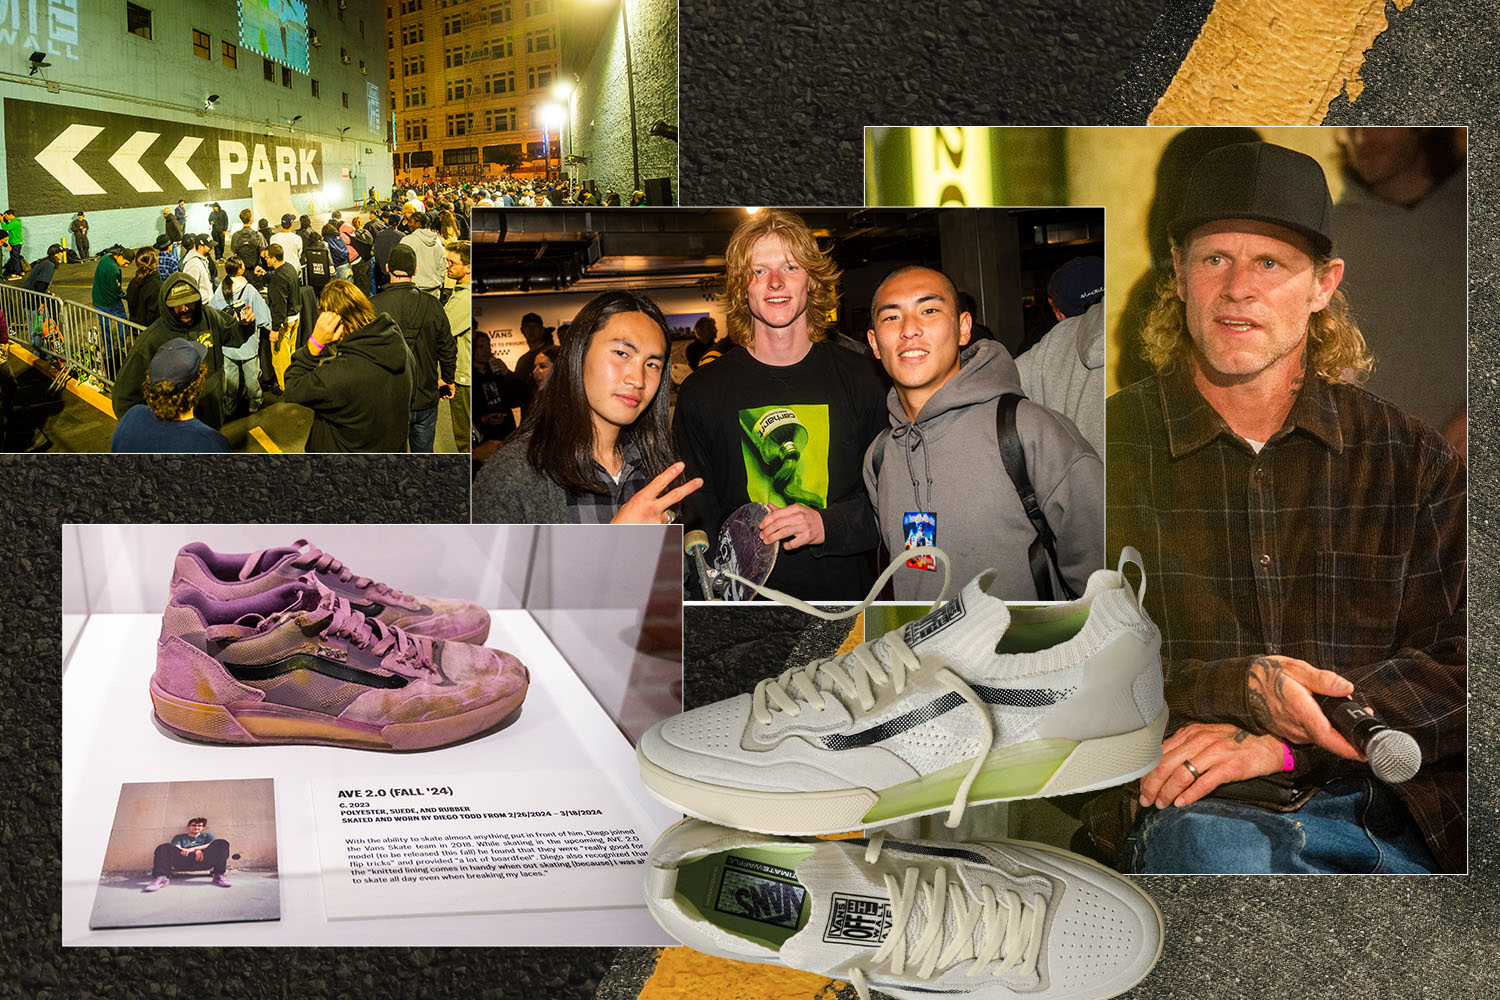 Collage of sneaker exhibit, people examining shoes, and a man in a hat at an event, focusing on sneaker culture